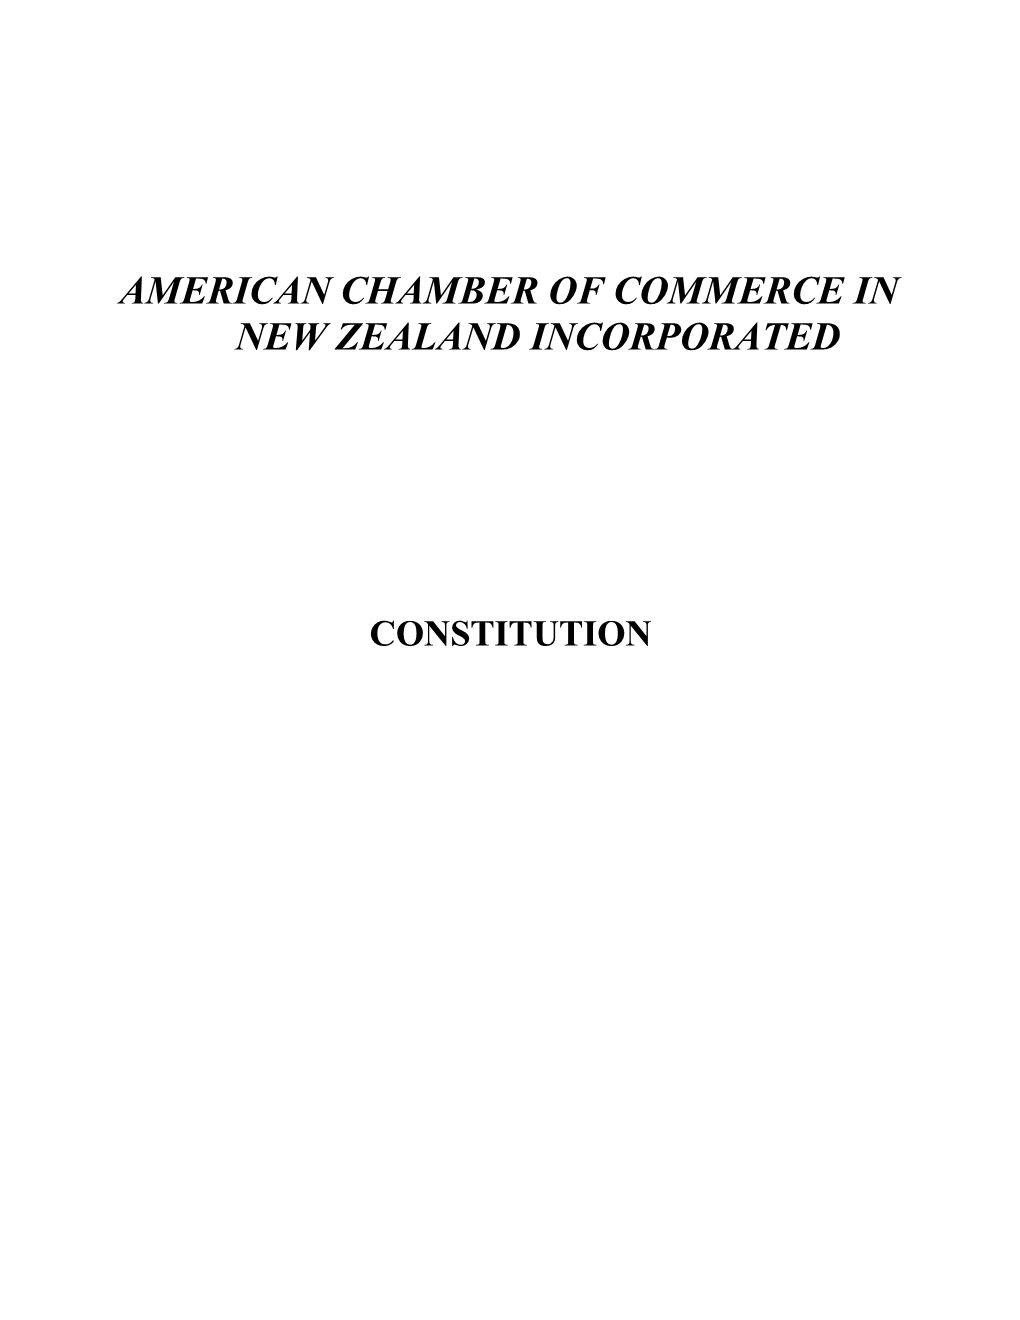 The American Chamber of Commerce in New Zealand Incorporated